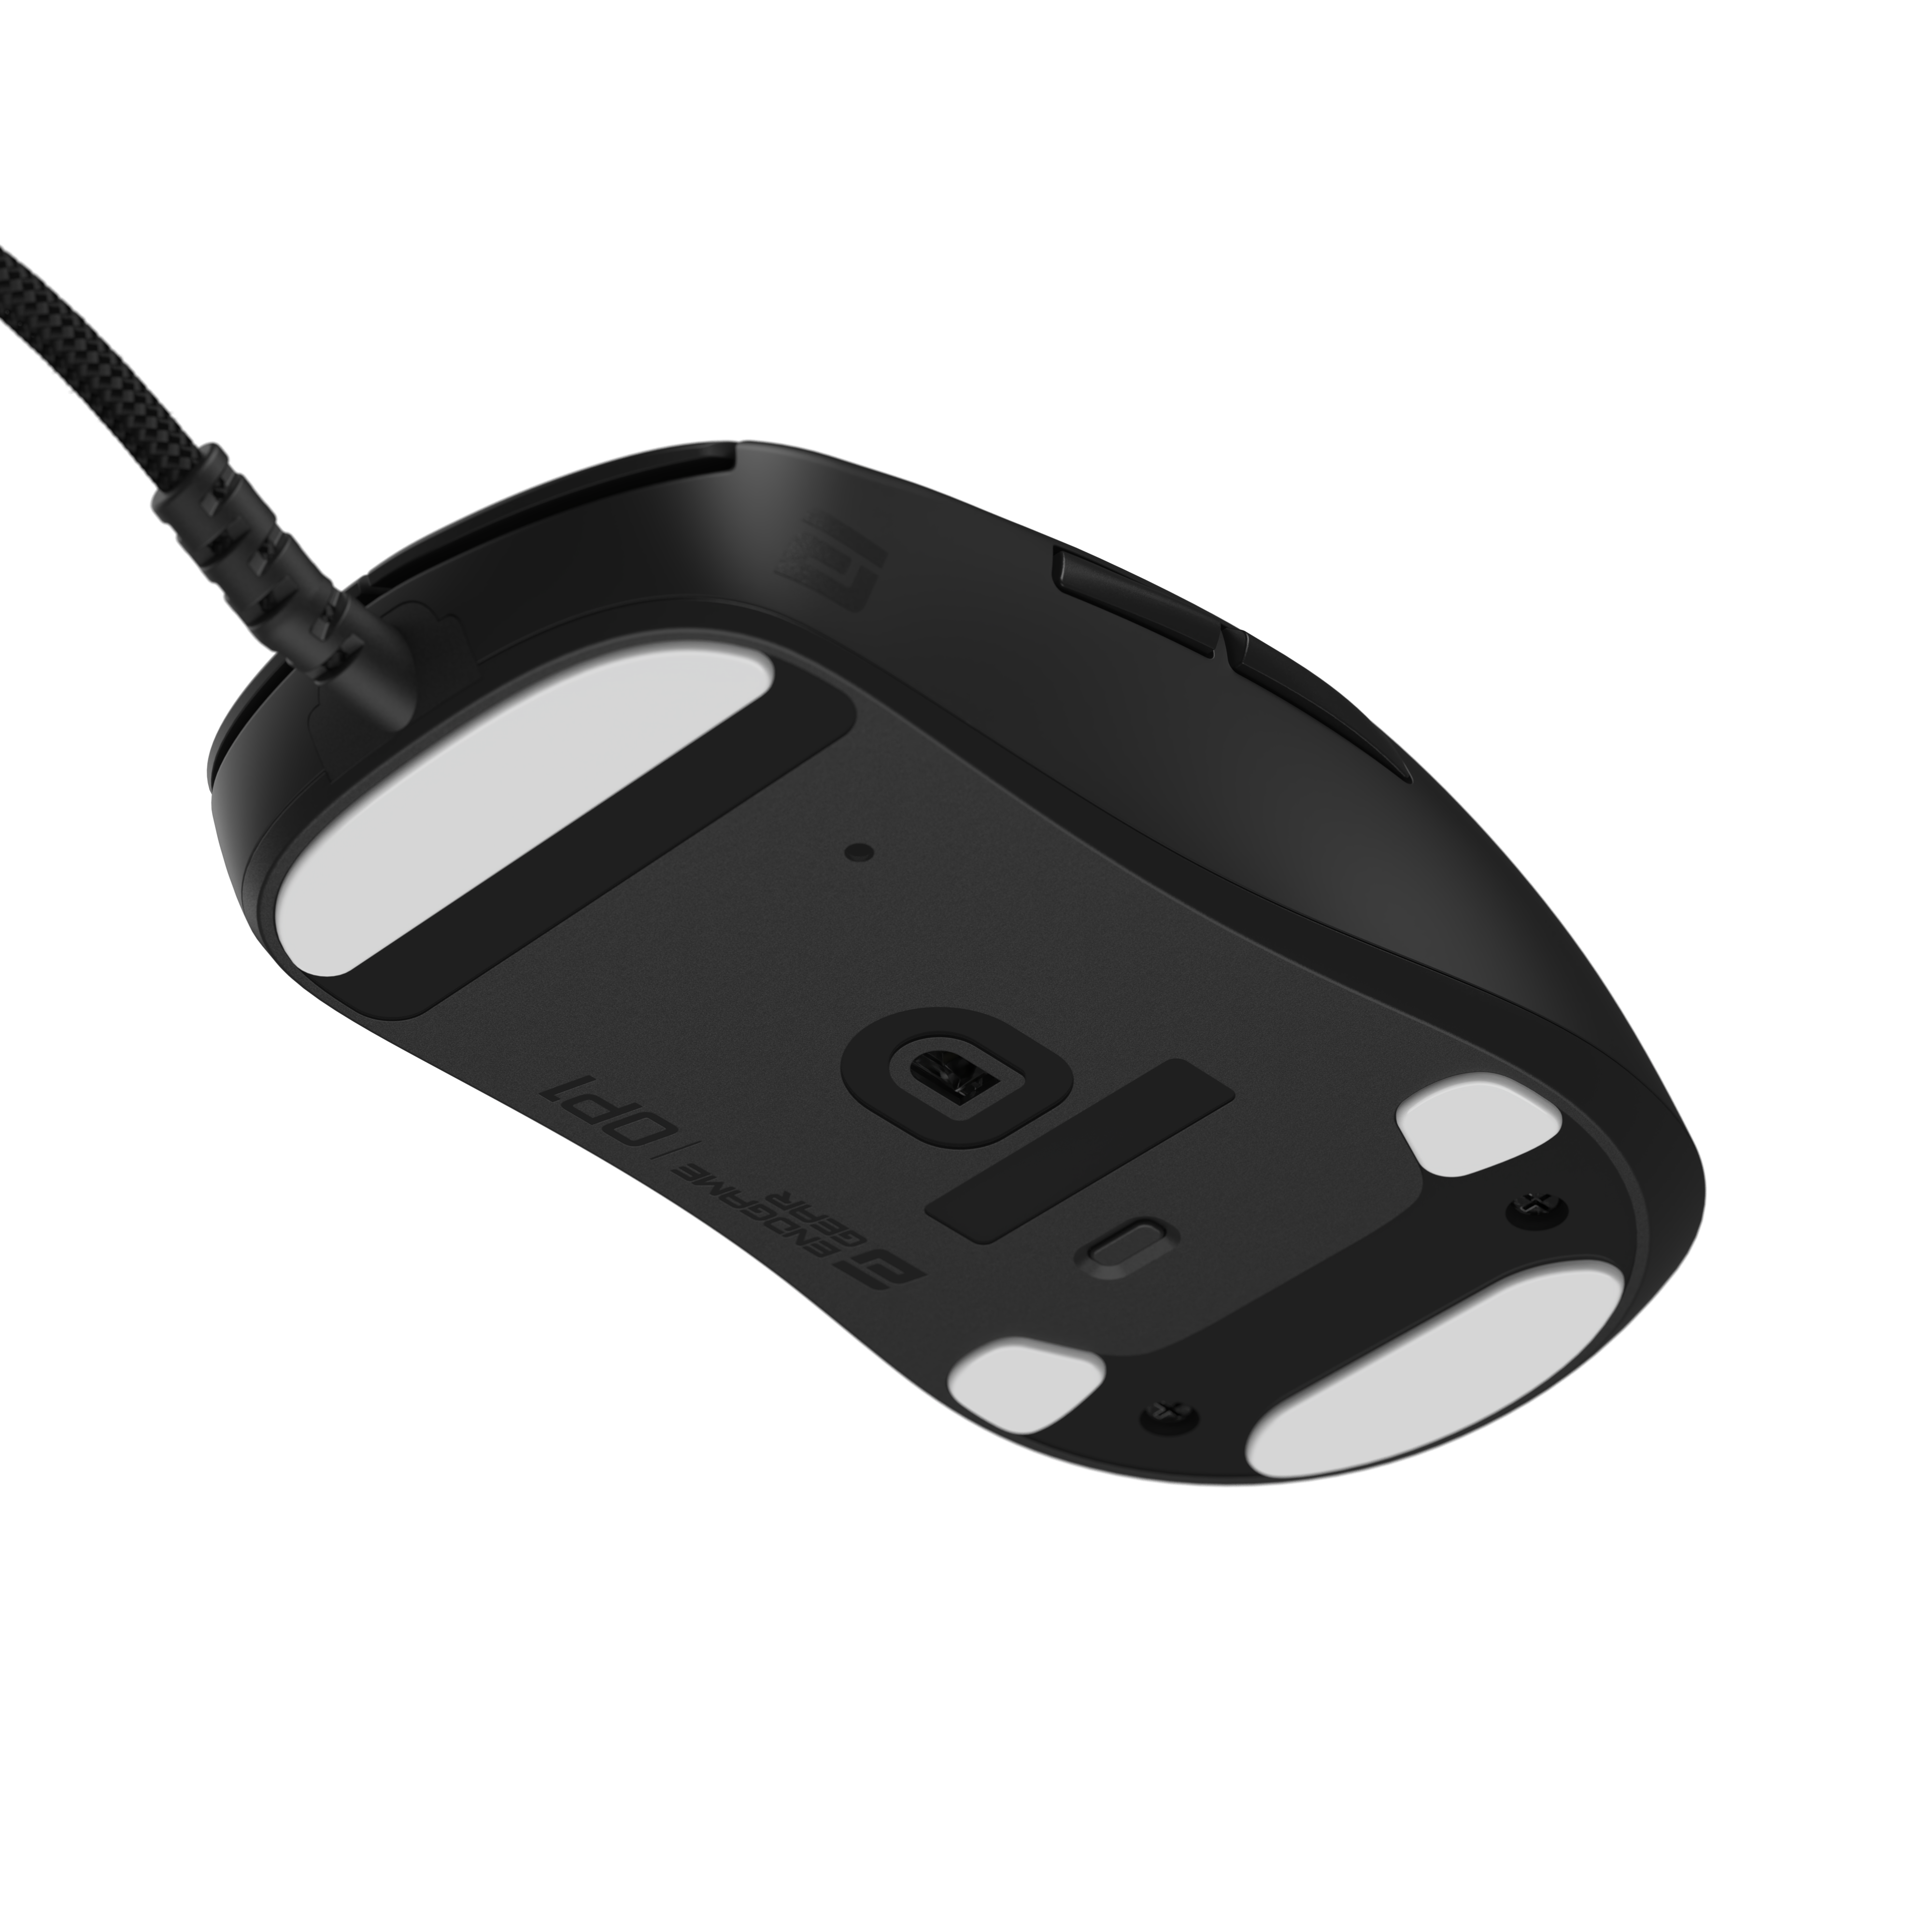  - OP1 Gaming Mouse - Black